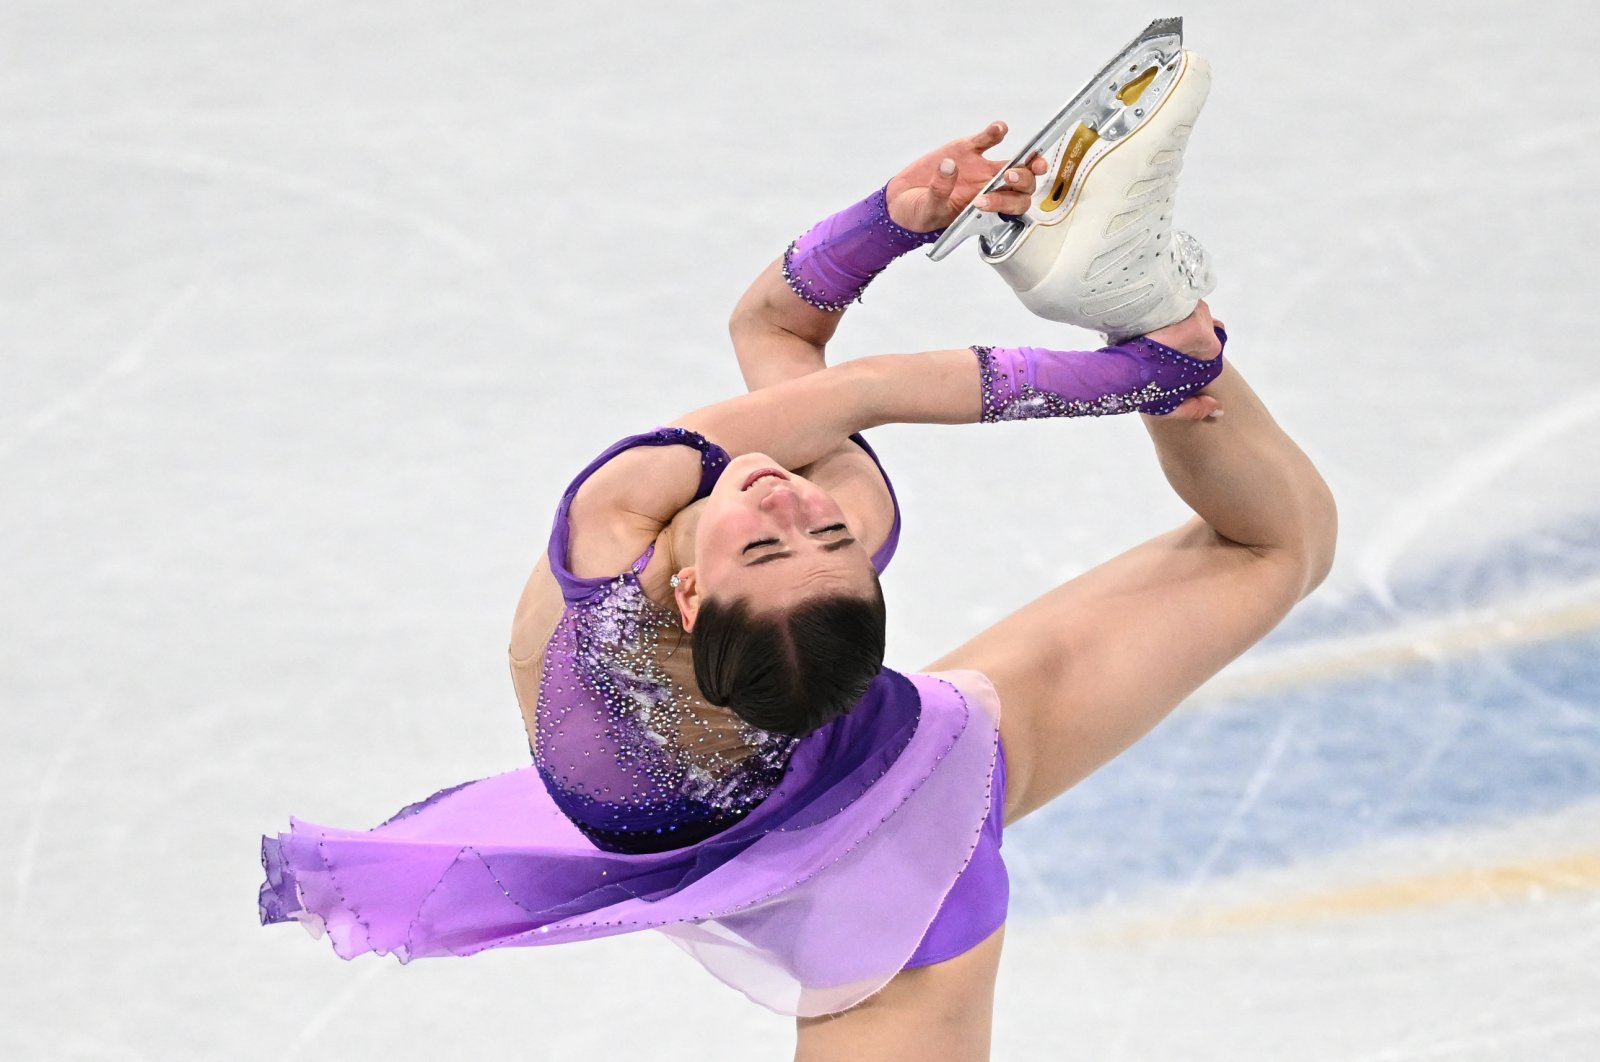 Russia&#039;s Kamila Valieva competes in the Beijing 2022 Winter Olympic women&#039;s single skating short program of the figure skating event, Beijing, China, Feb. 15, 2022. (AFP Photo)